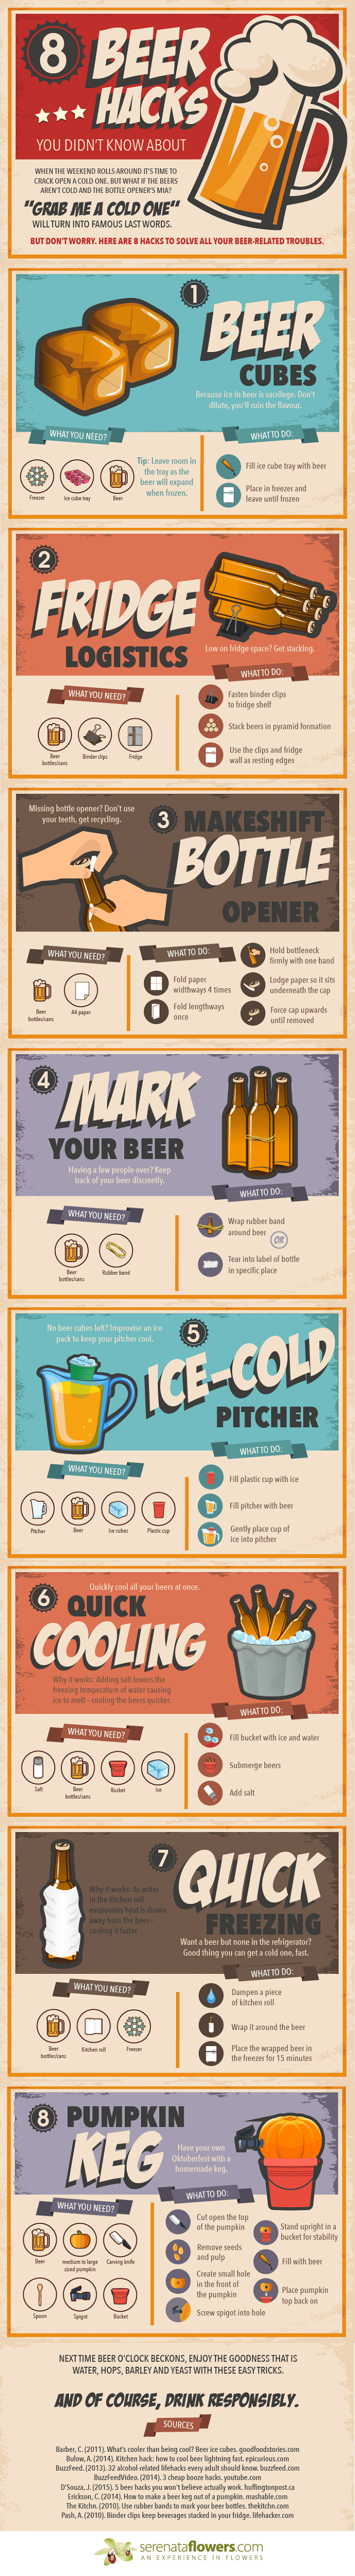 8-Beer-hacks-you-didnt-know-about